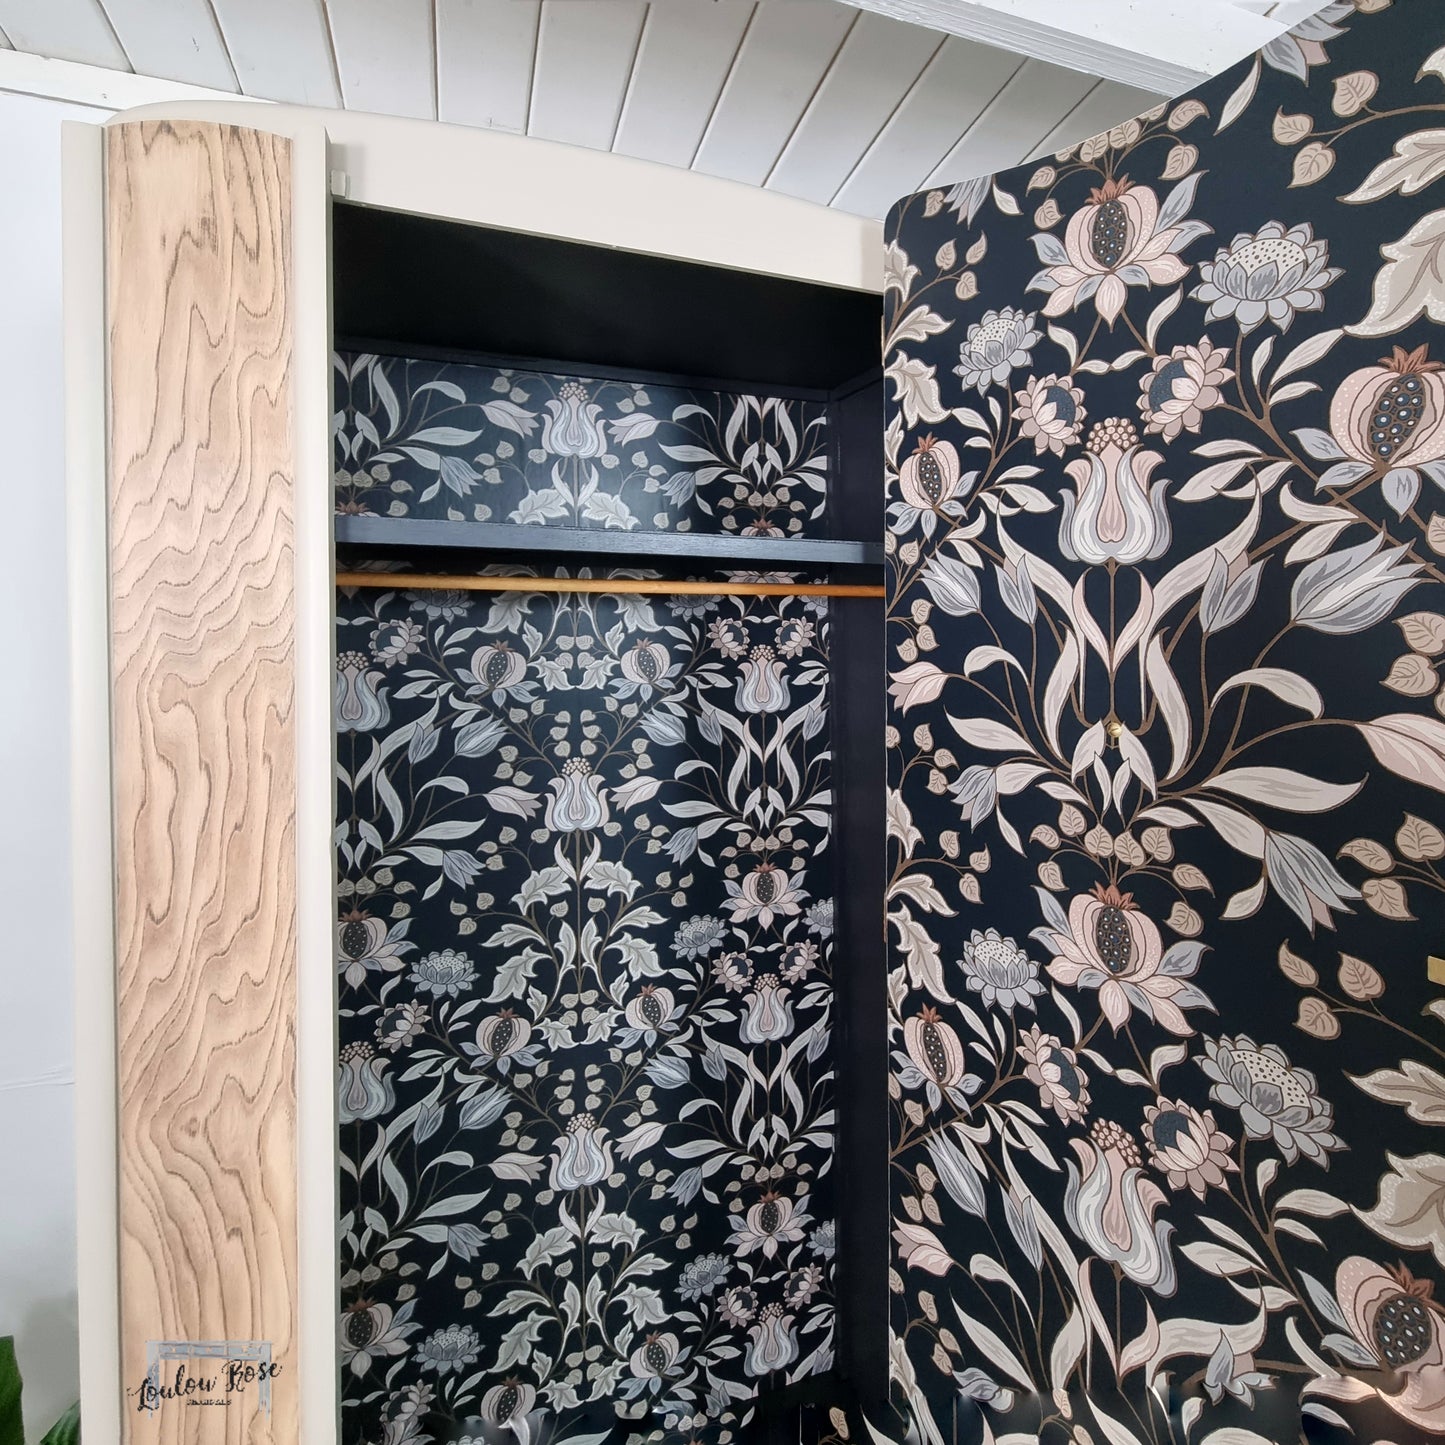 Wardrobe, Hall Robe, Hallway Storage Cupboard in Cream with Beautiful Wood Grain Front and Nouveau Floral Wallpapered Interior